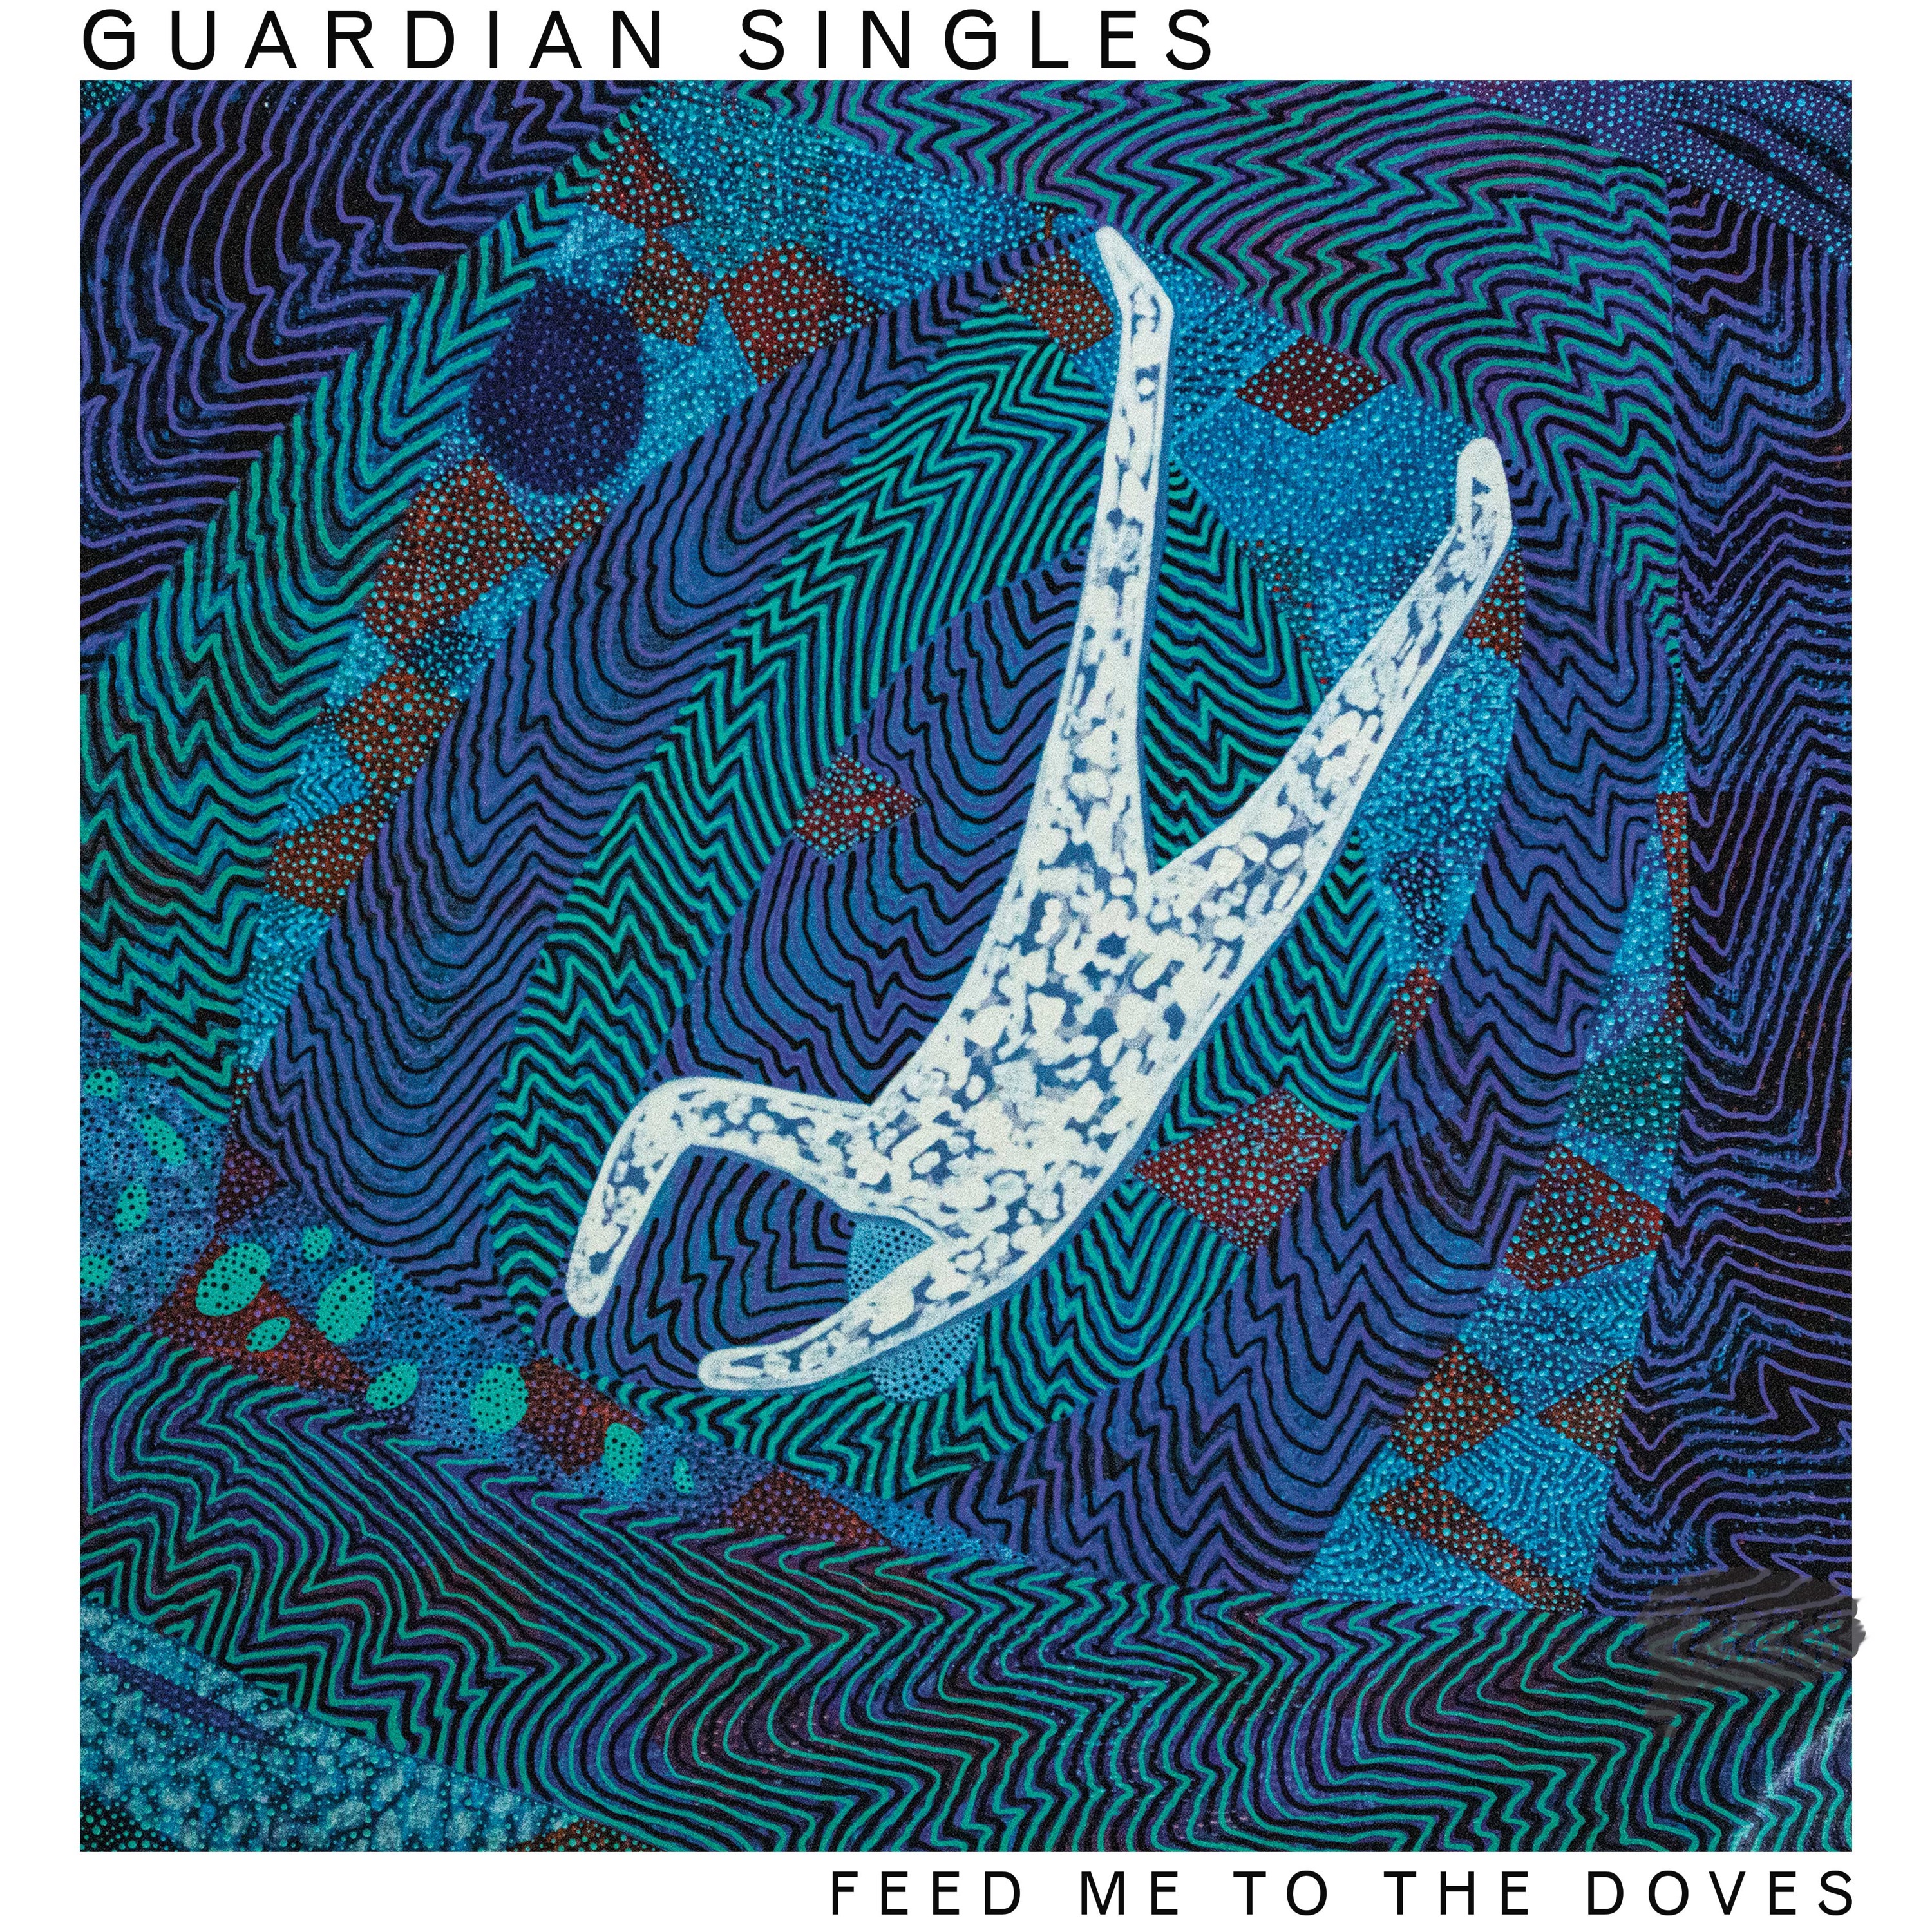 Guardian Singles - Feed Me To The Doves (Ltd whirlpool